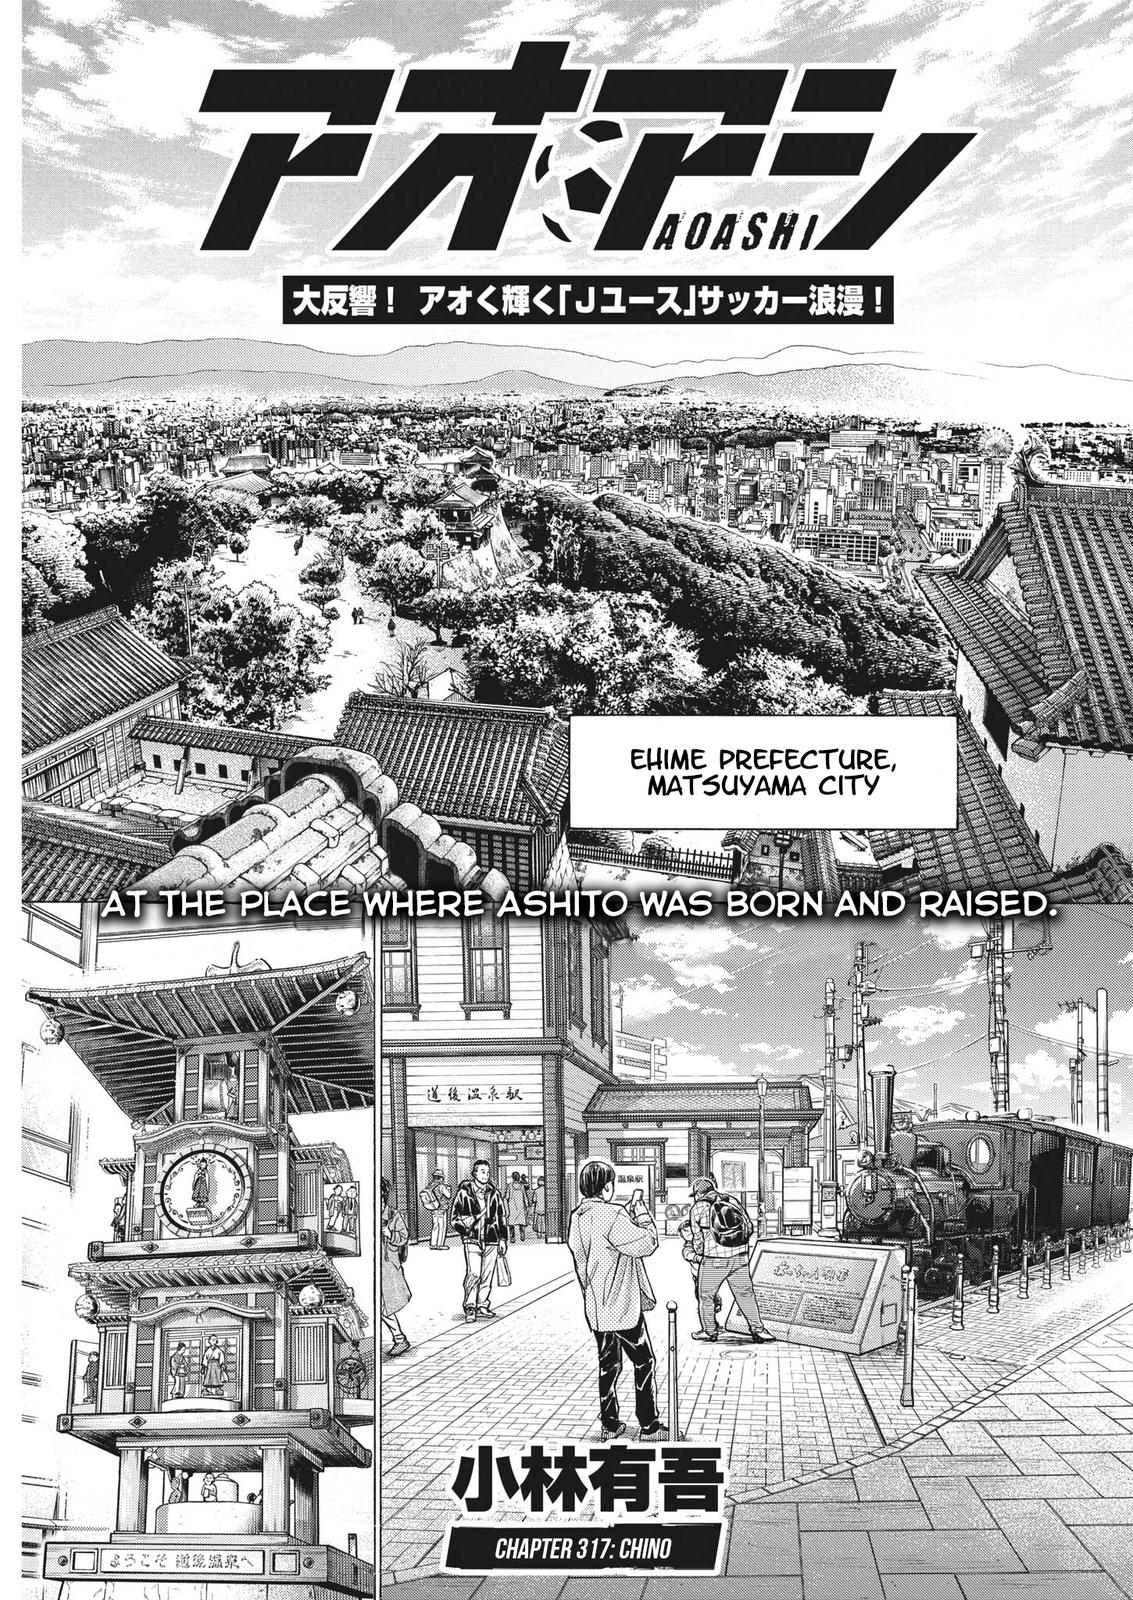 Ao Ashi, Chapter 352  TcbScans Org - Free Manga Online in High Quality